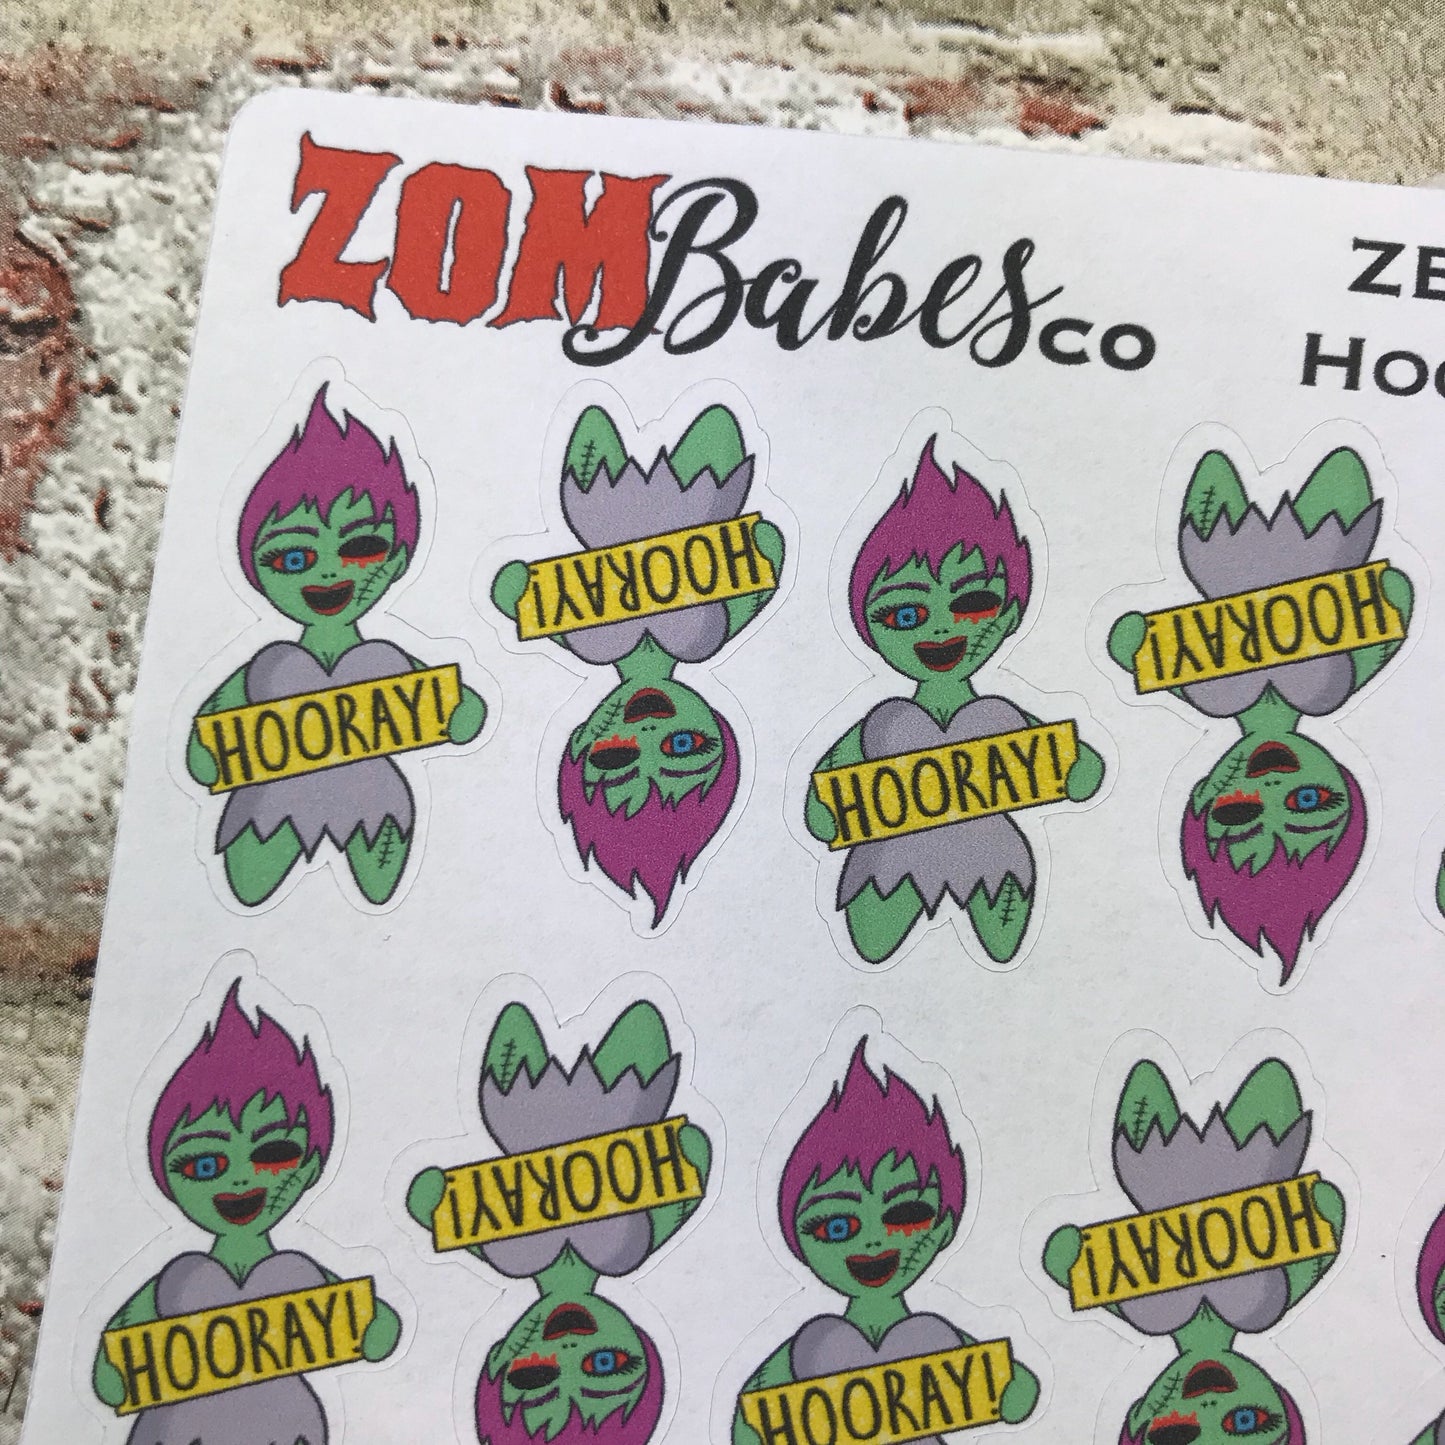 Hooray / celebrate Zombabe character sticker for planners (ZB27)